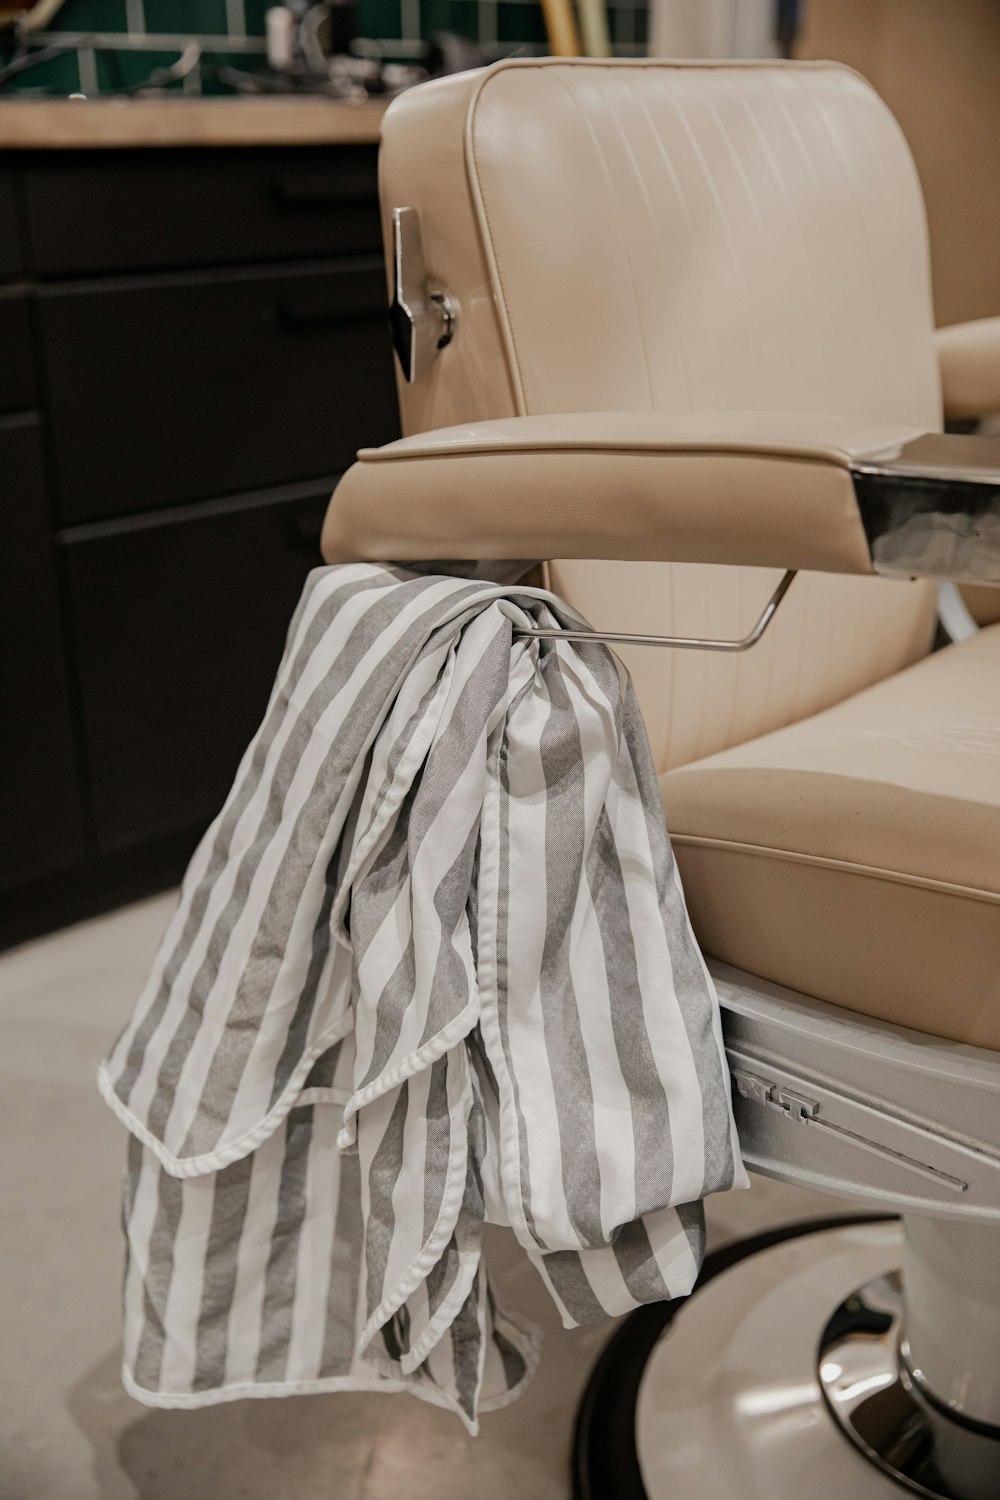 white and black textile on beige leather chair